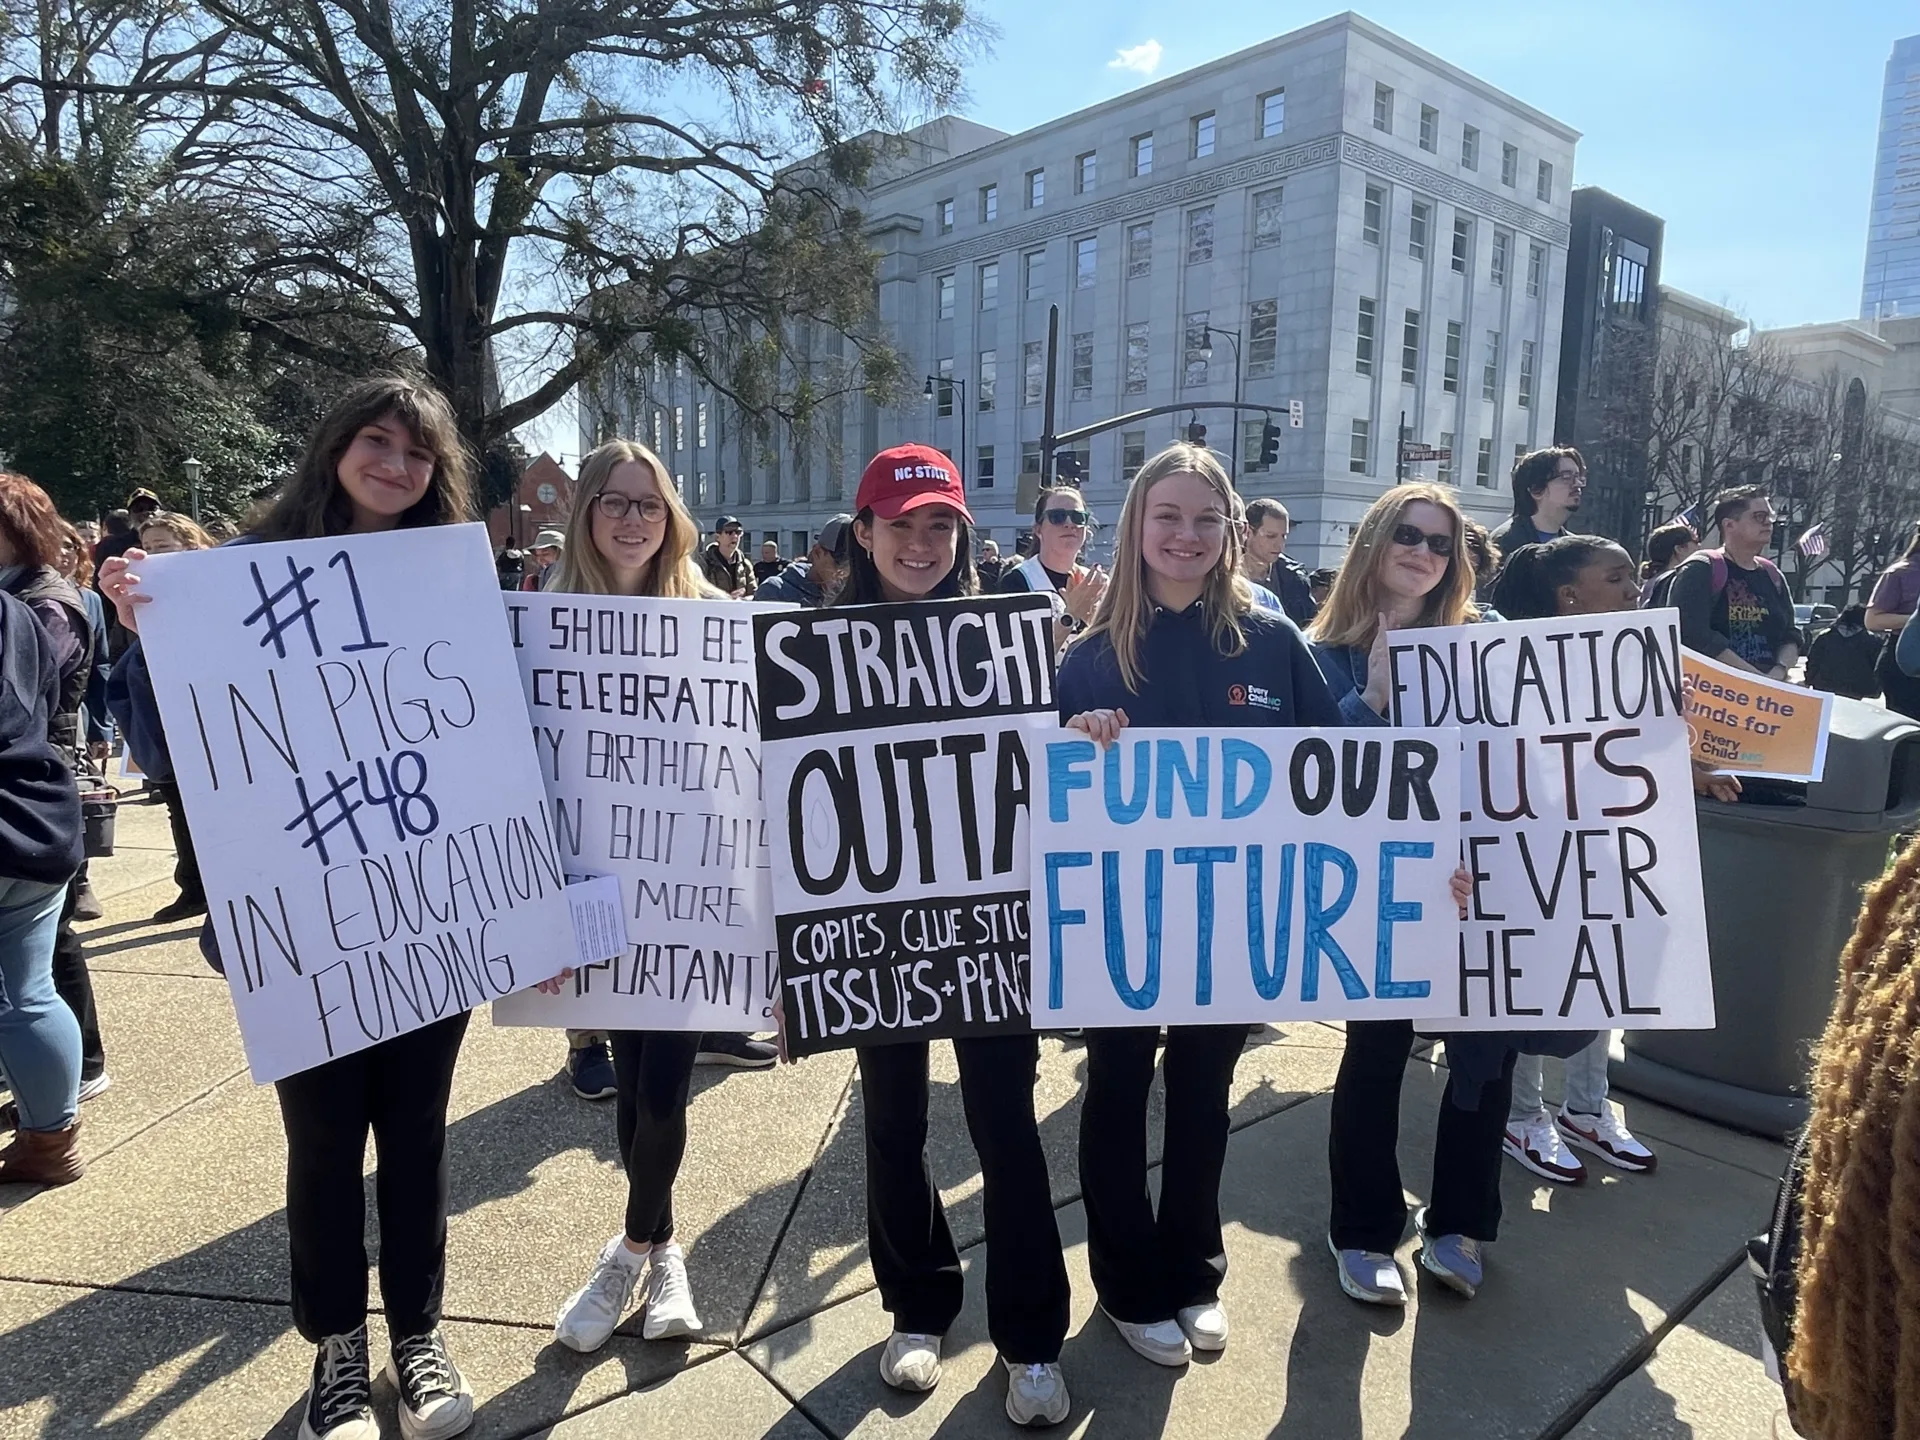 Students standing at a protest with signs